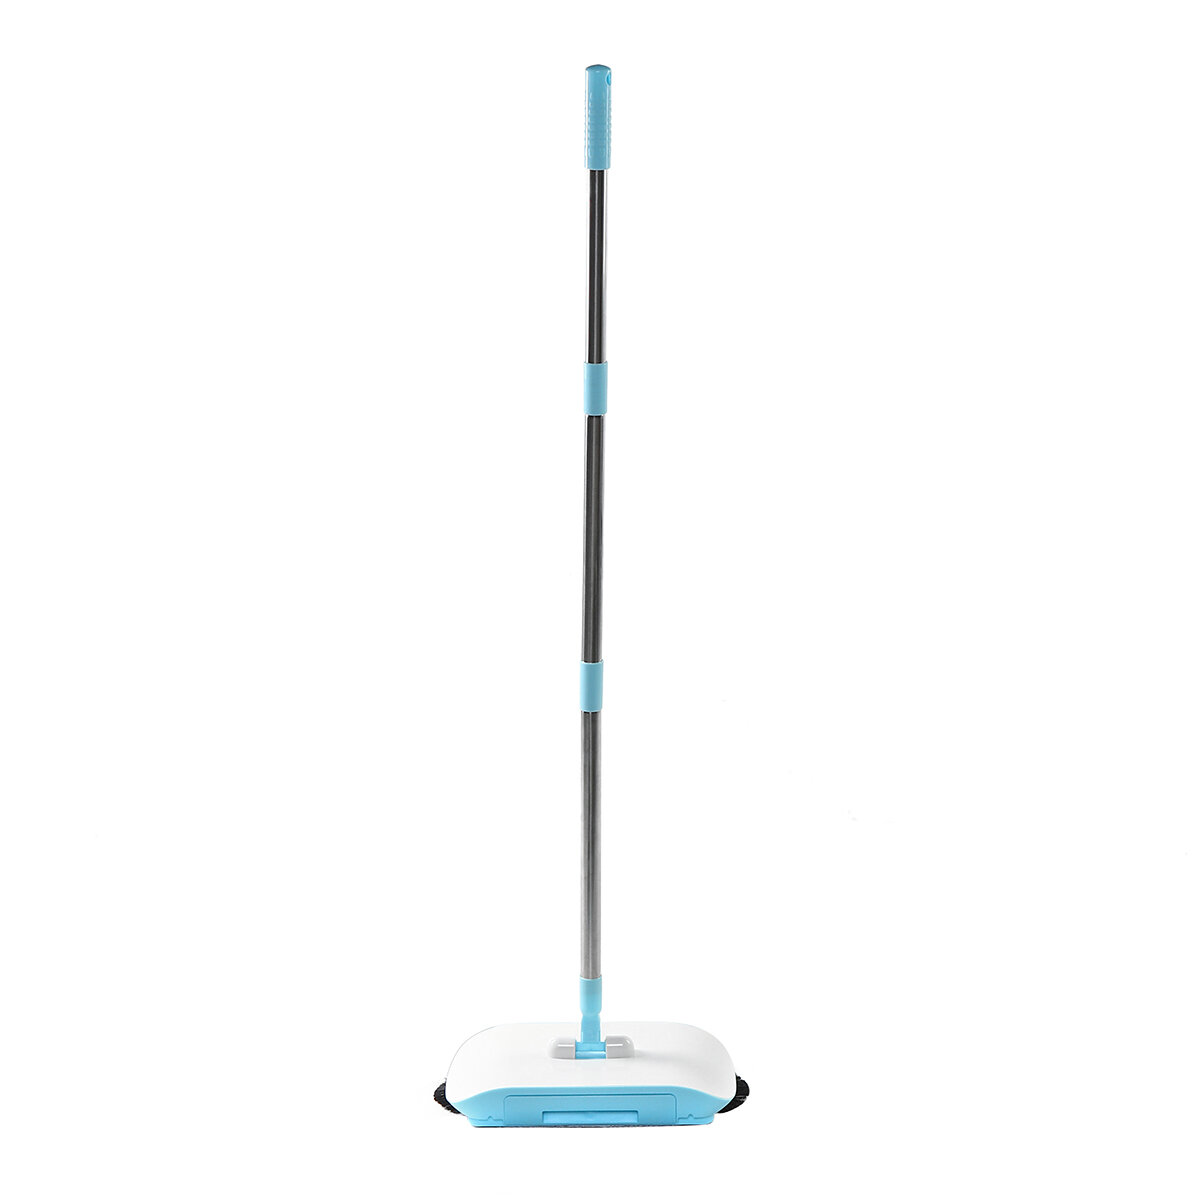 3 in 1 Mopping Machine Spin Hand Push Sweeper 360? Brush Sweeper ToolAdjustable Floor Cleaner